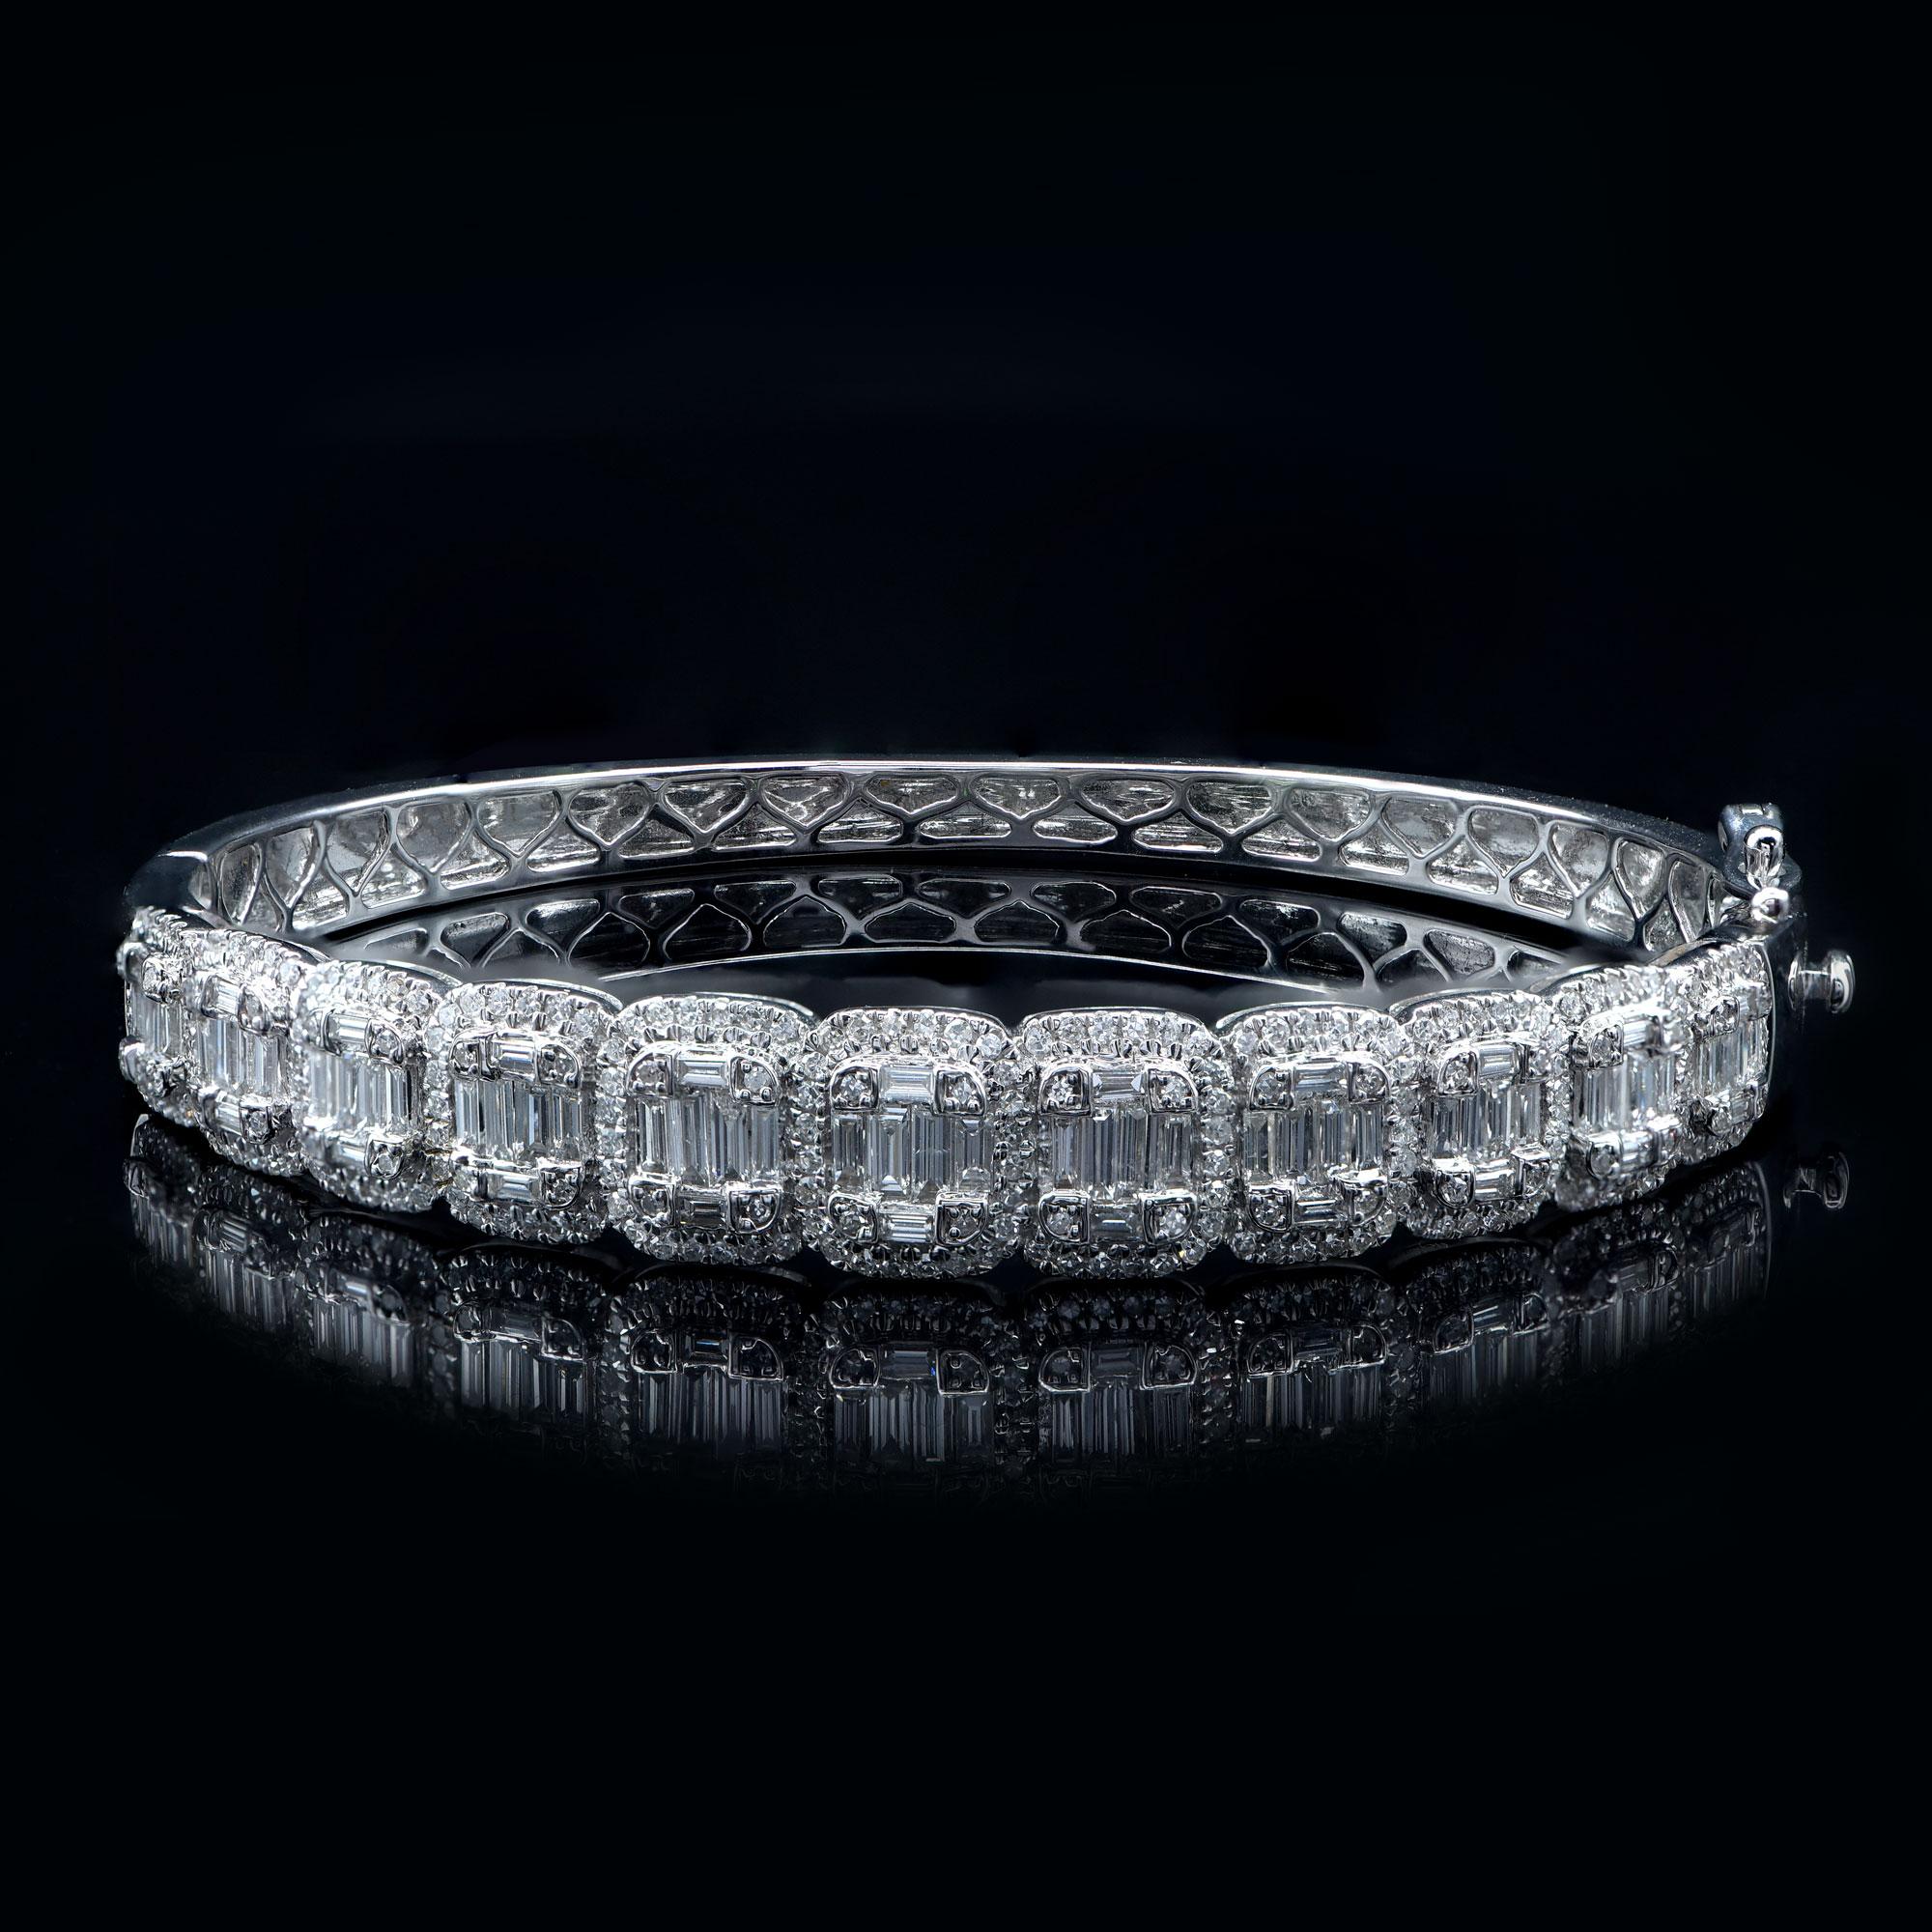 This designer diamond bangle is accentuated with 246 brilliant cut and 66 baguette-cut diamond in pave and channel setting. The bangle is made in 18-karat white gold. The diamonds are graded H-I Color, I2 Clarity. 
The diameter of the bangle is